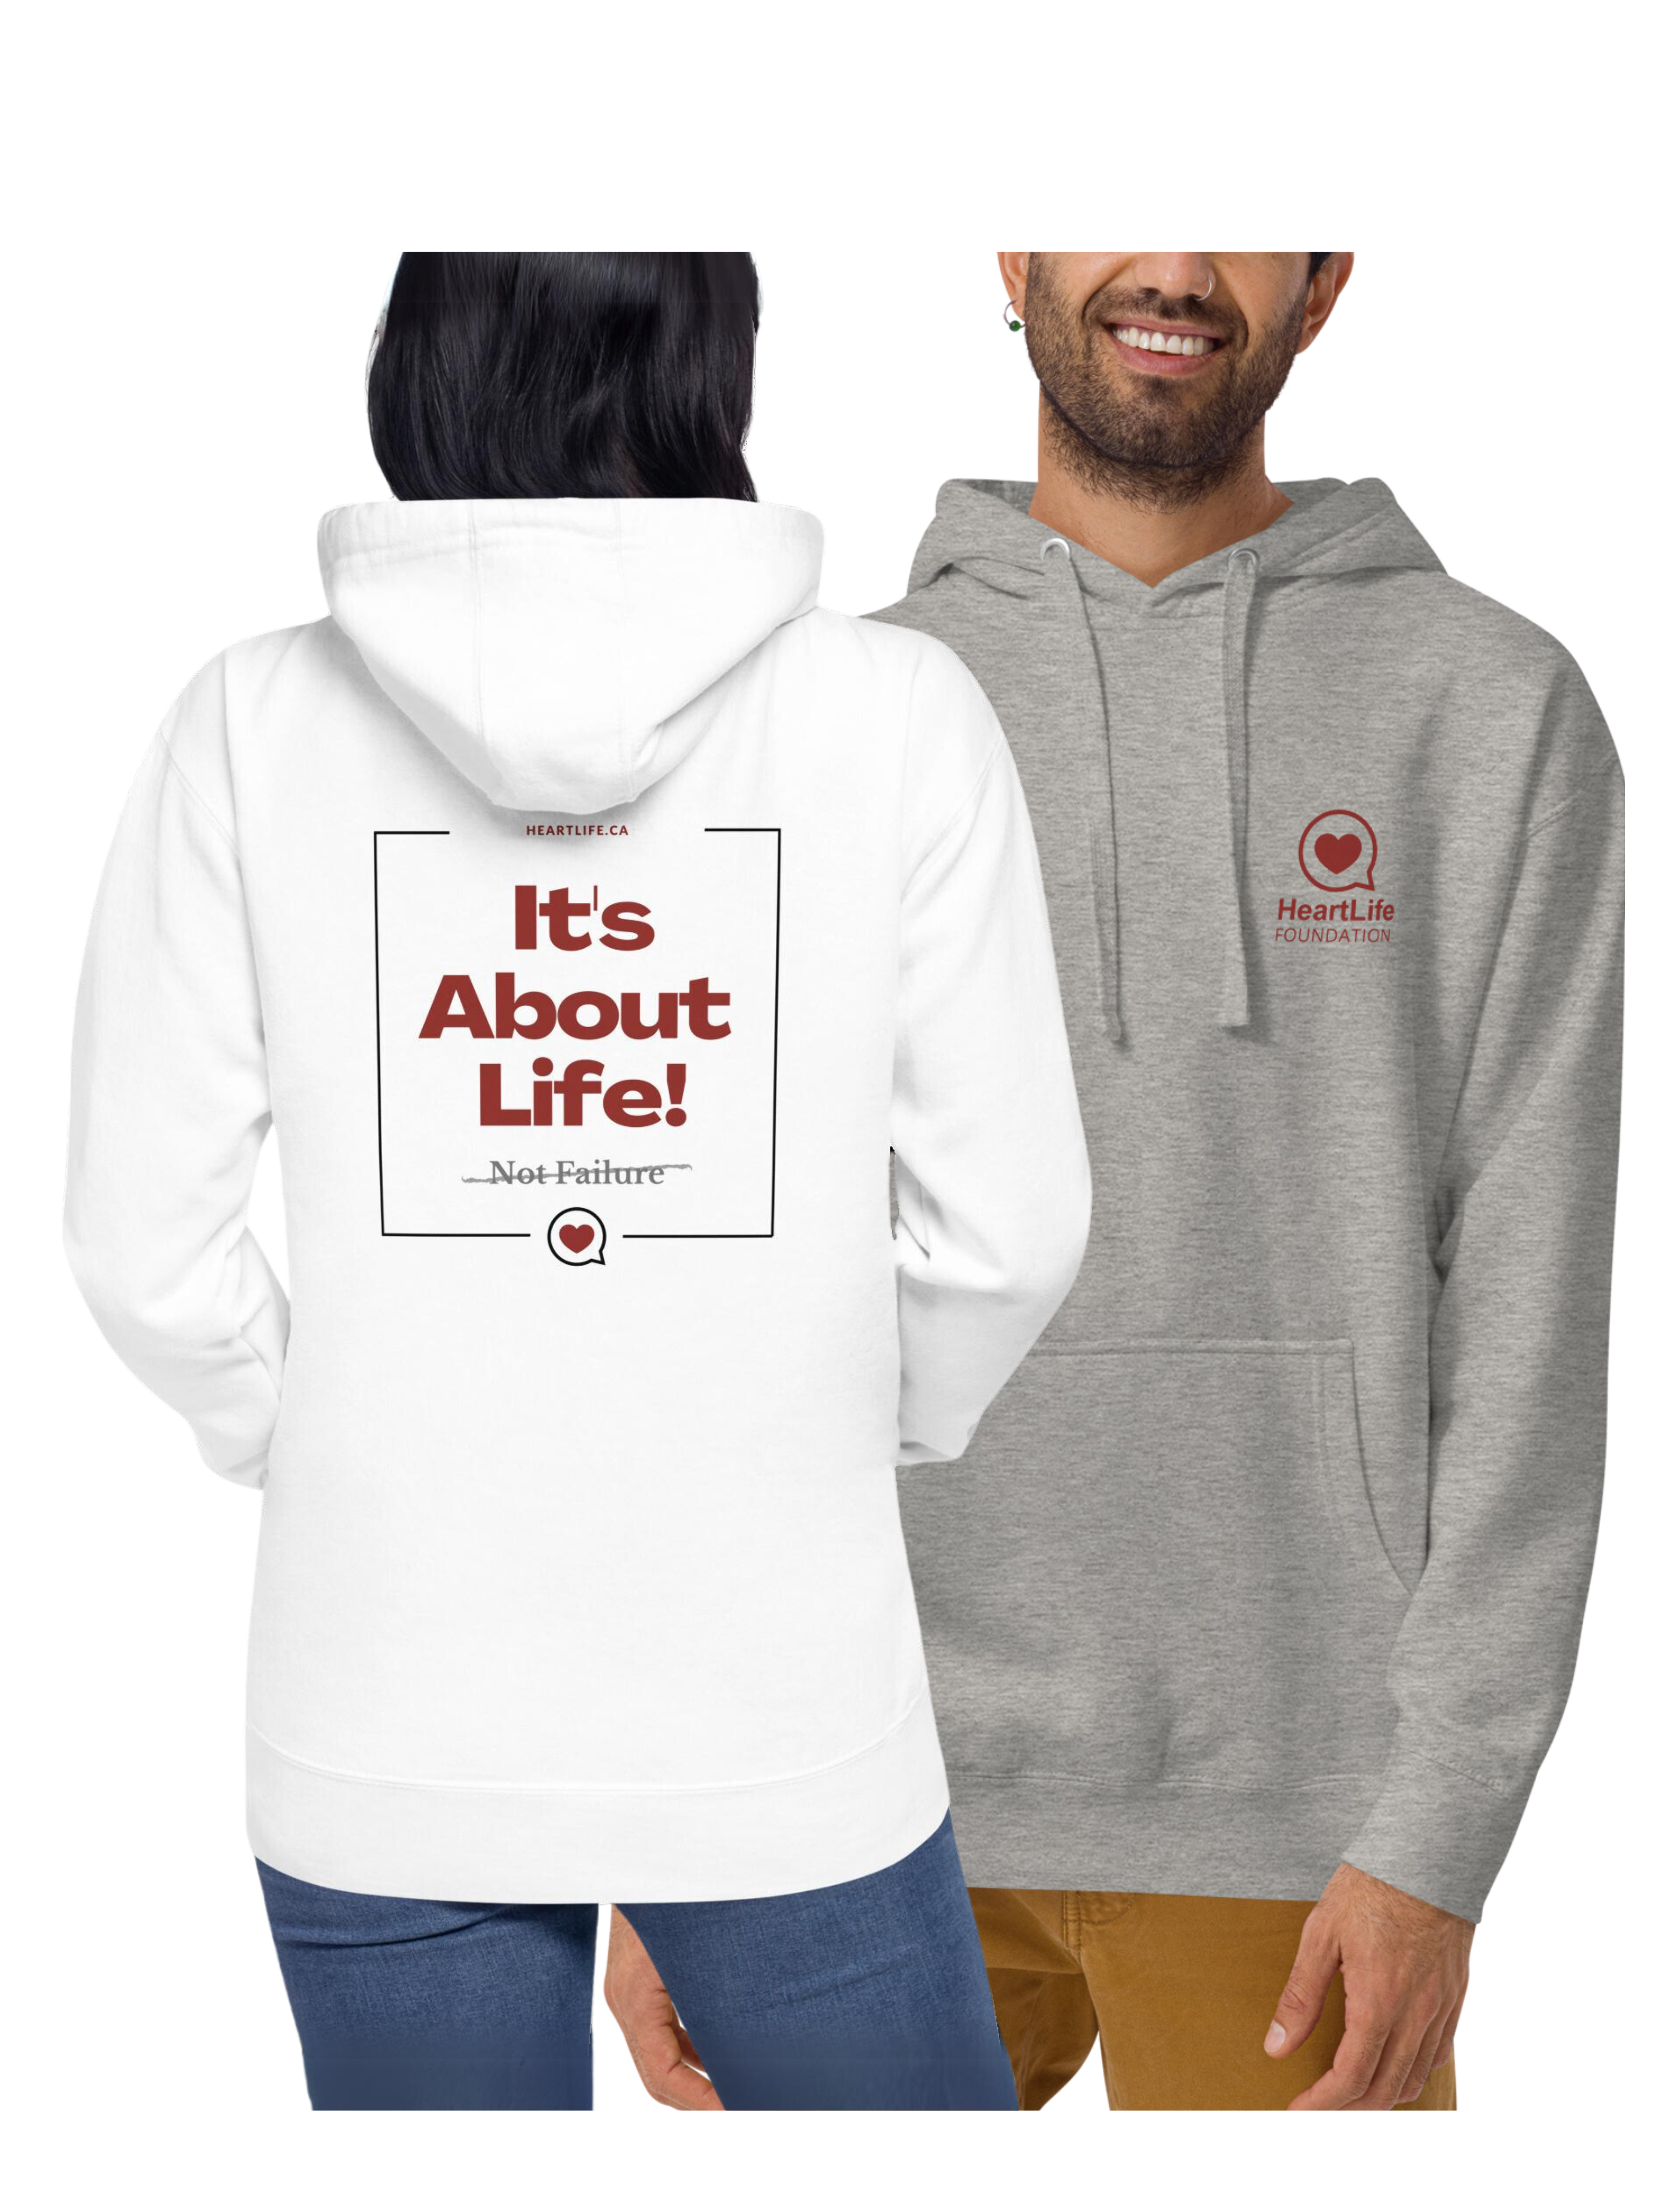 "It's About Life!" Unisex Hoodie